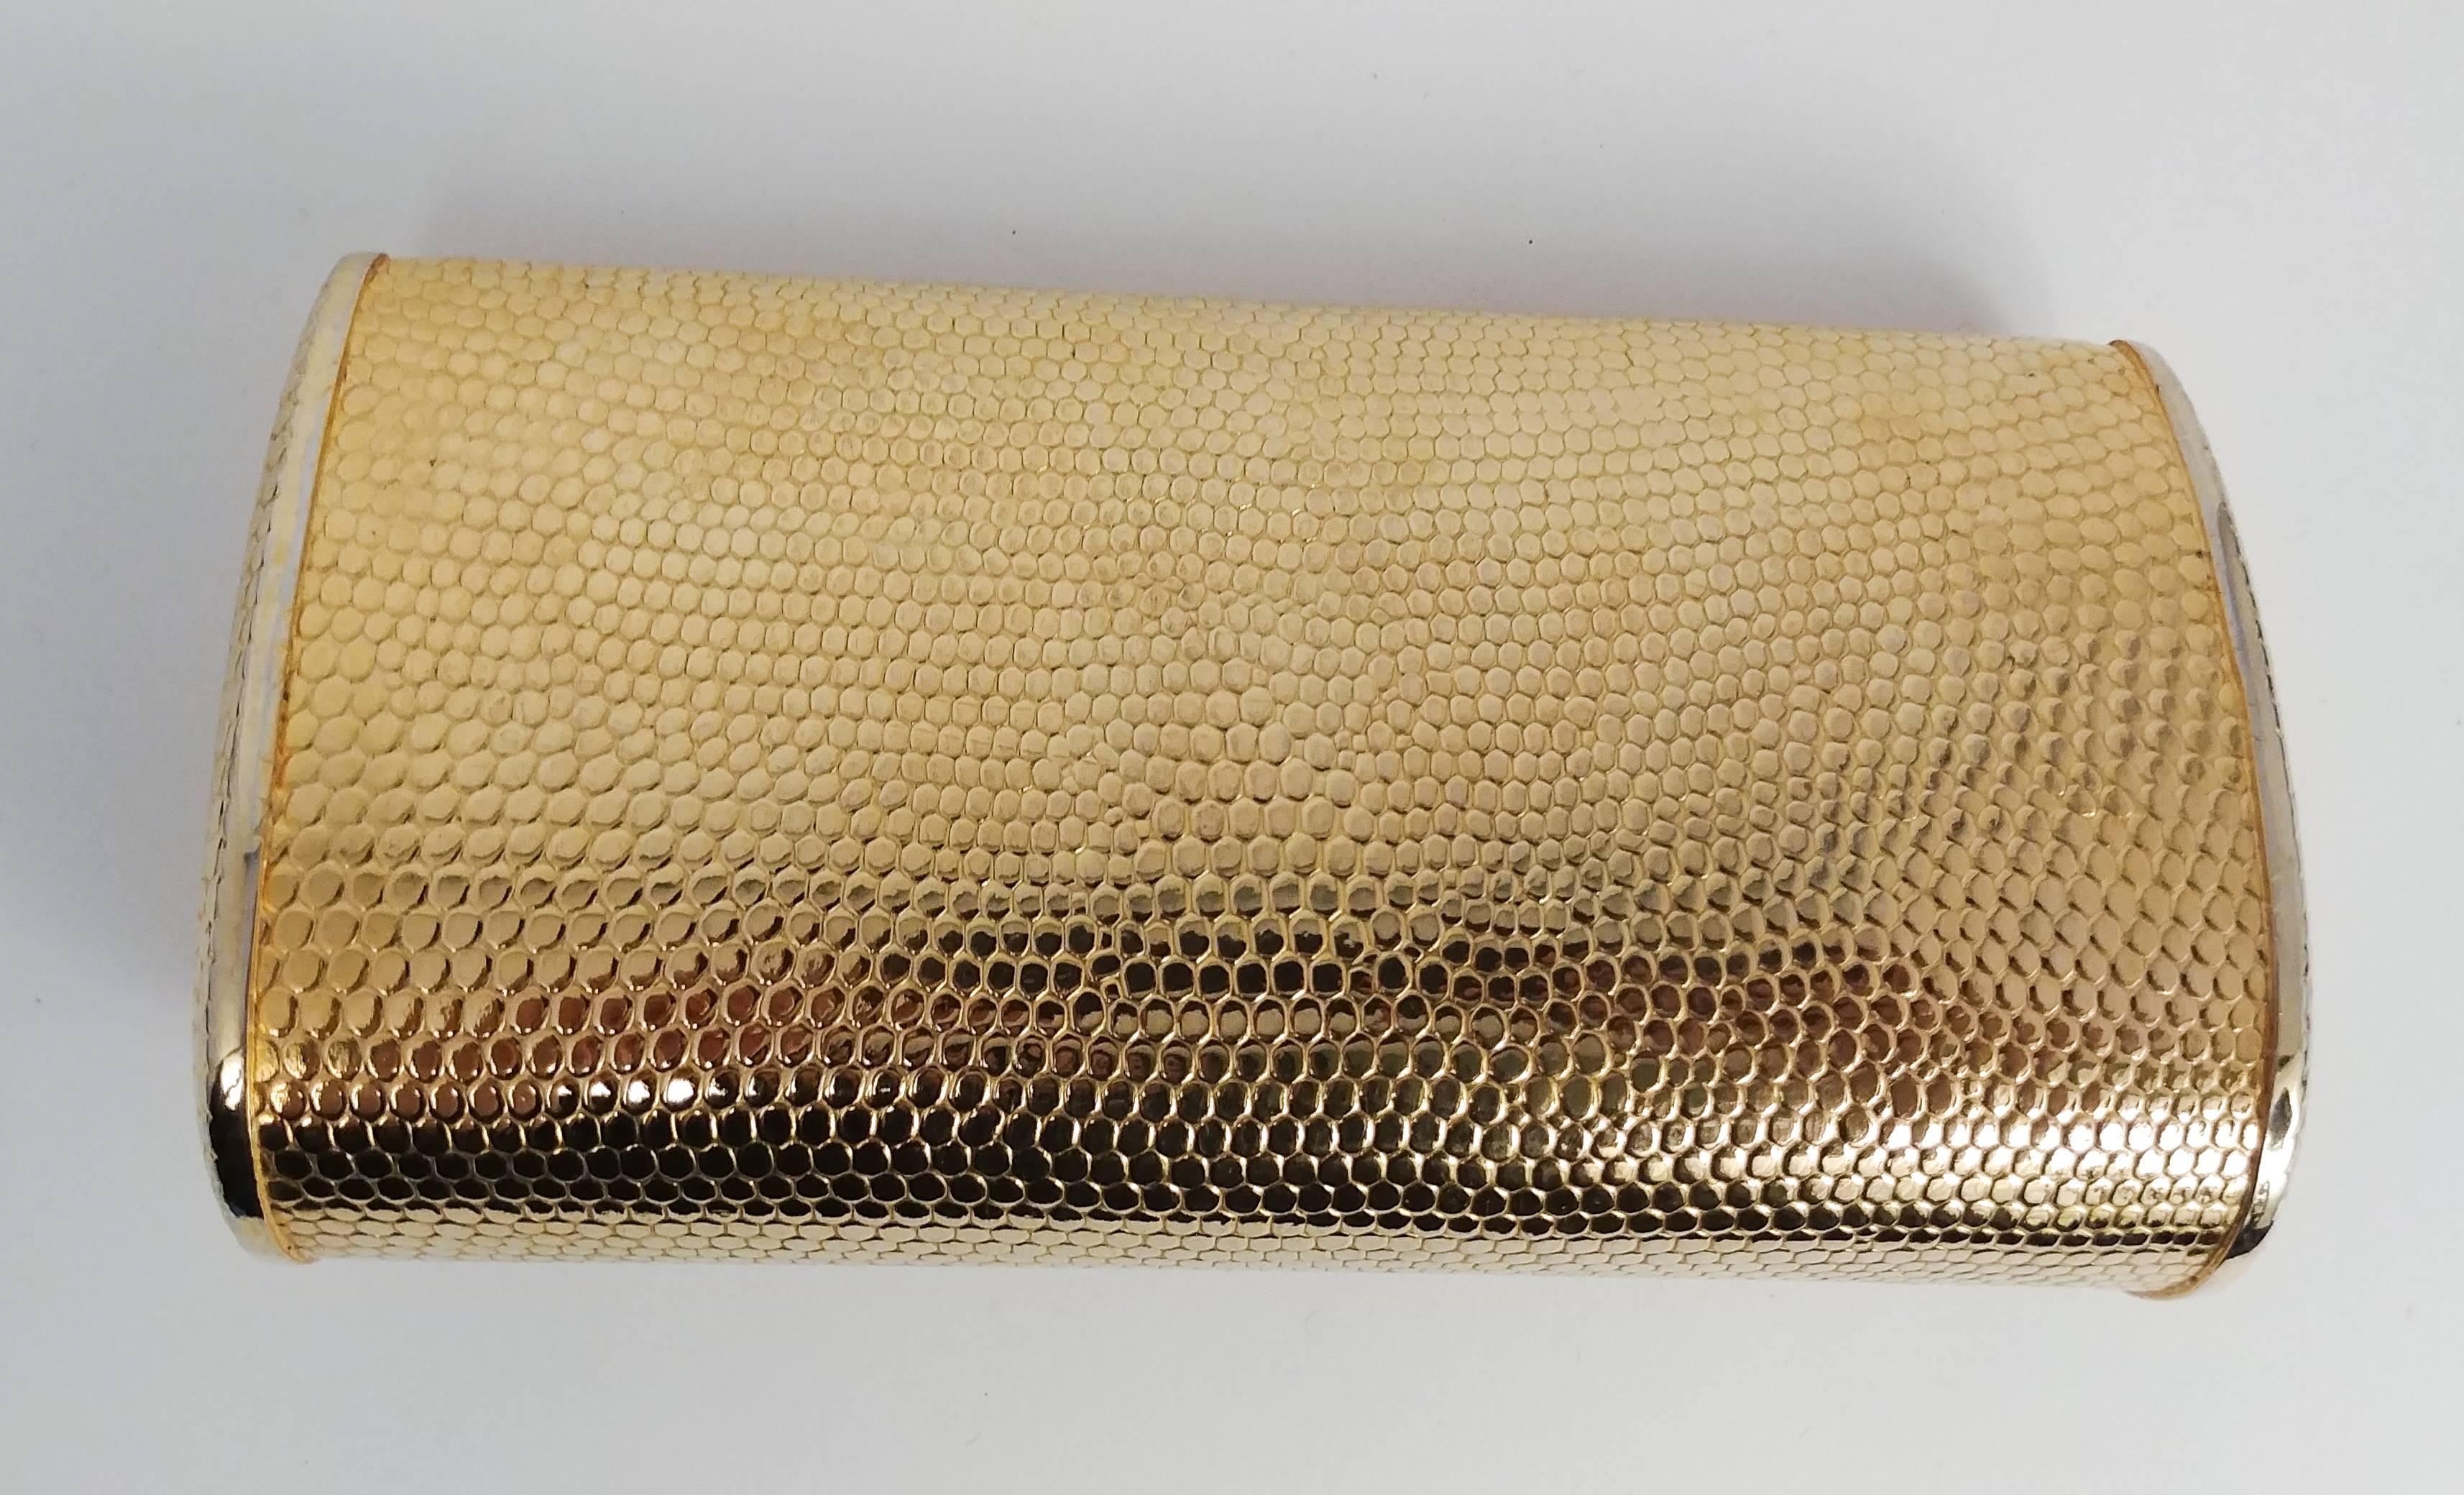 1950s Walborg Golden Metal Clutch Purse. Hammered texture resembles lizard skin. Mirror inside top flap when flipped open, lined with velvet. 